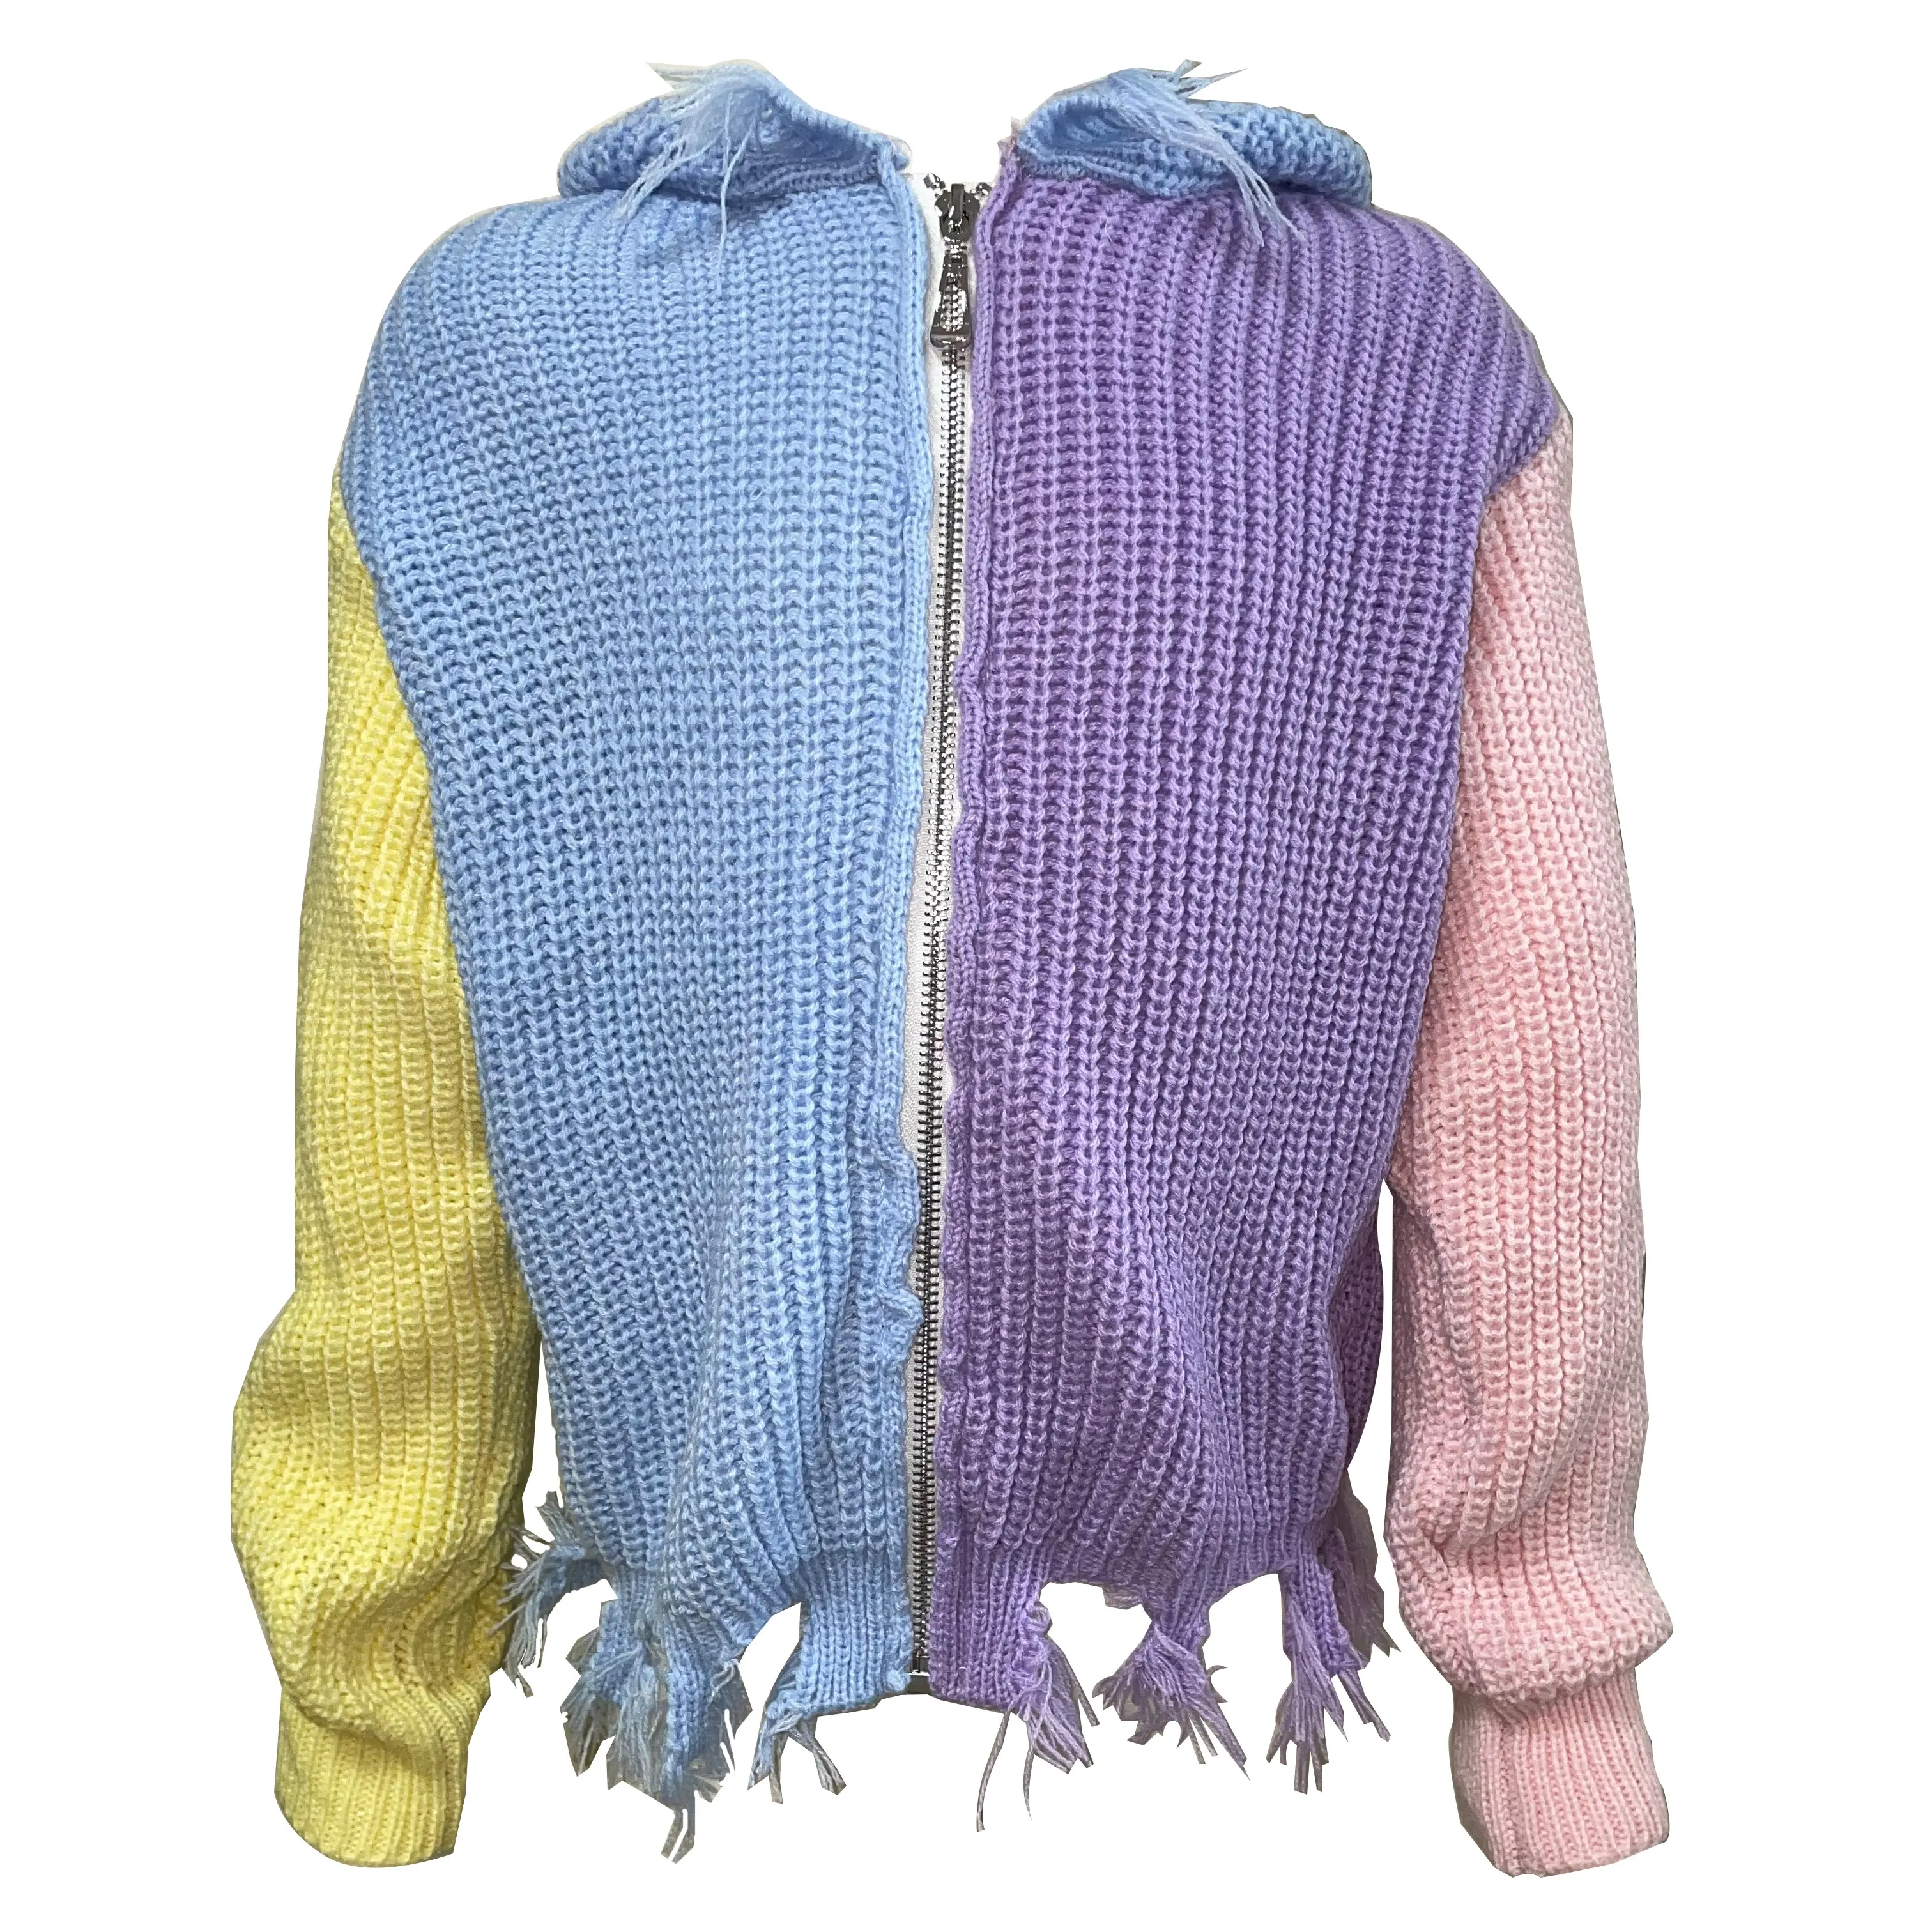 2021 Fashion Sweater Kids Knitted sweater 10 Years Girls Cardigan Imported Children girls' sweaters